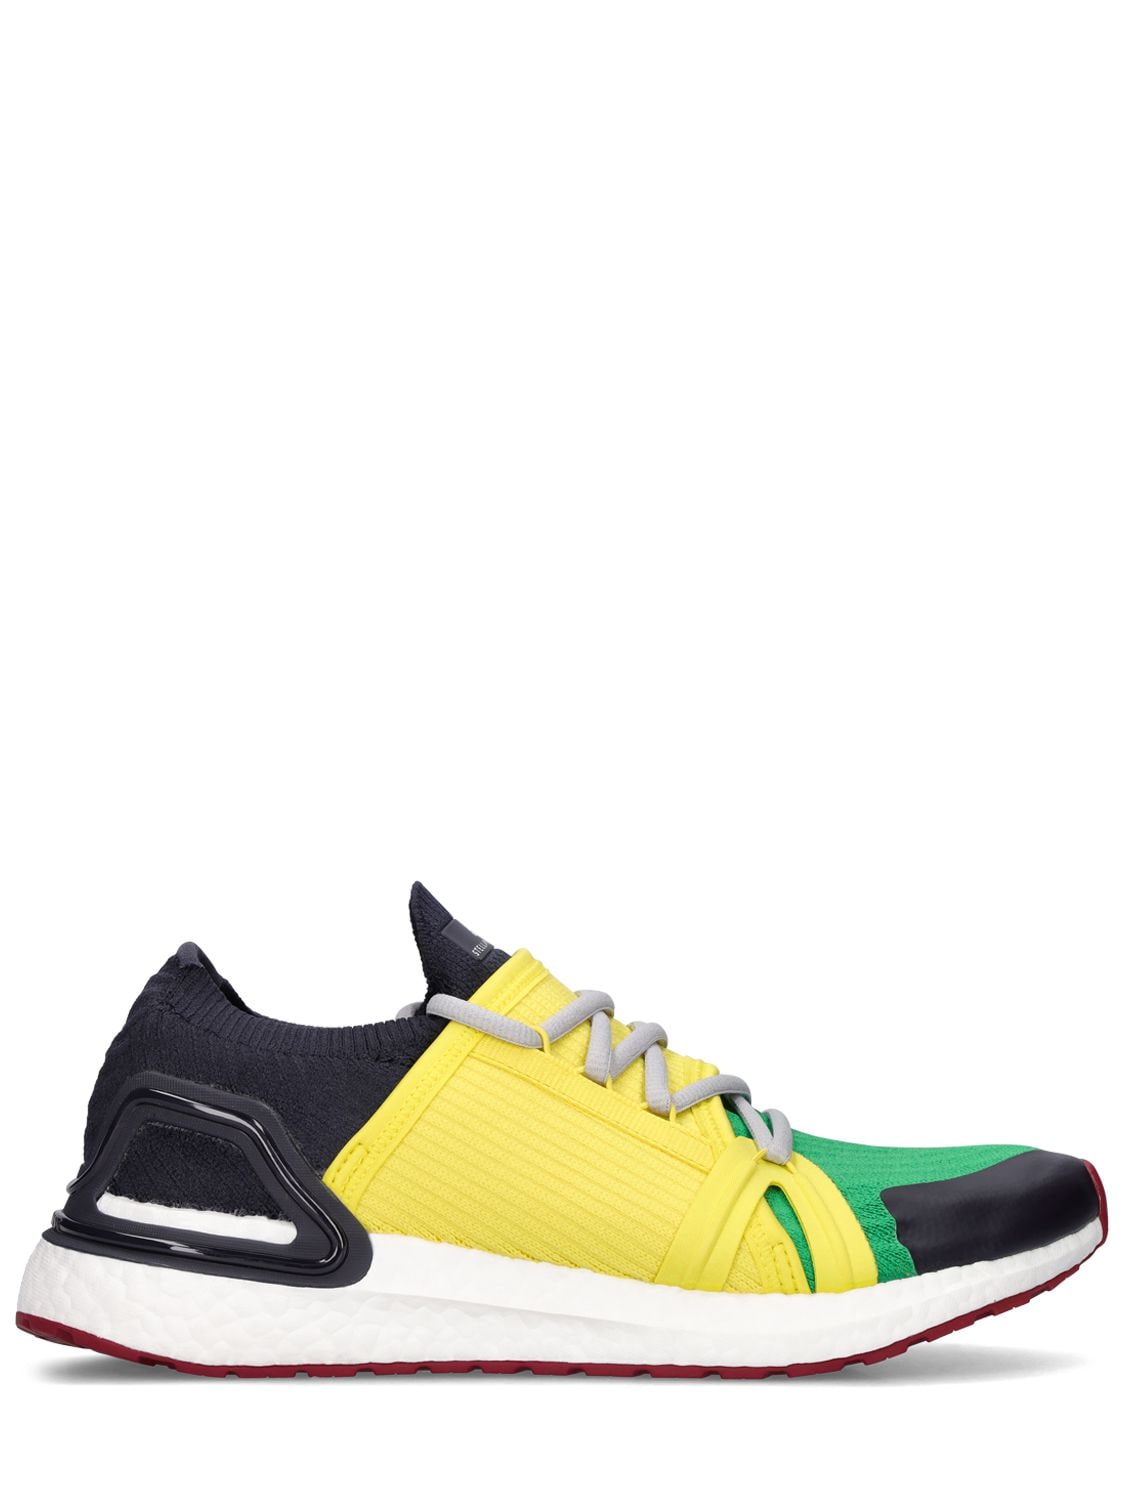 Adidas By Stella Mccartney Asmc Outdoor Boost 20 Sneakers In White,yellow